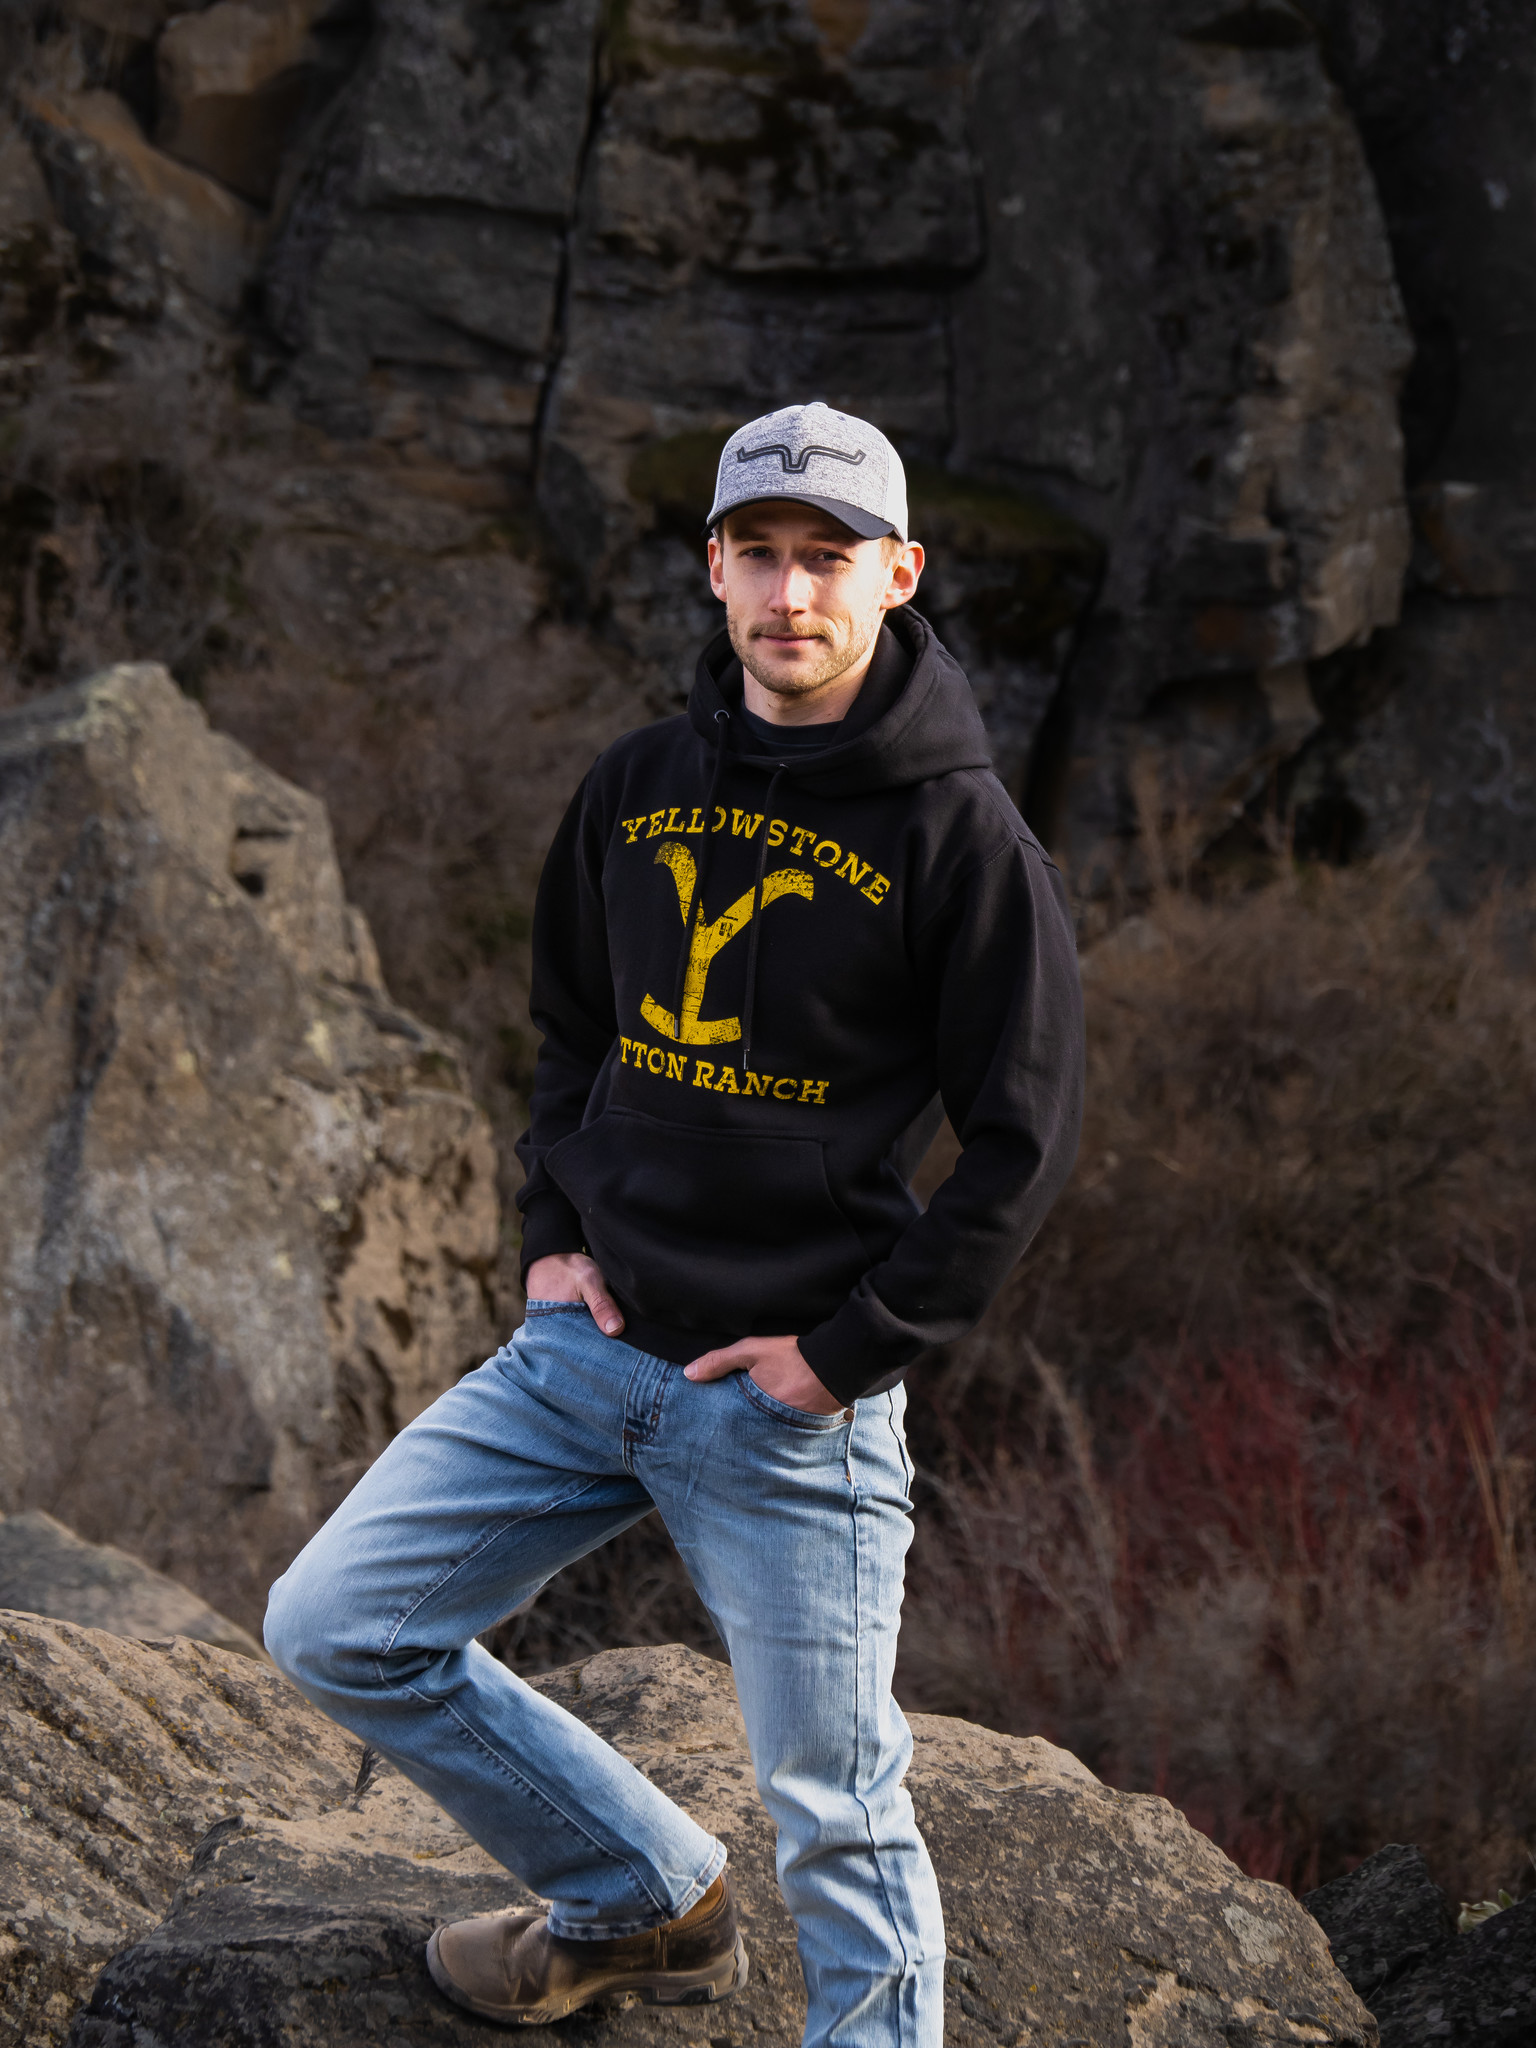 Dixie's Carries Yellowstone Apparel!